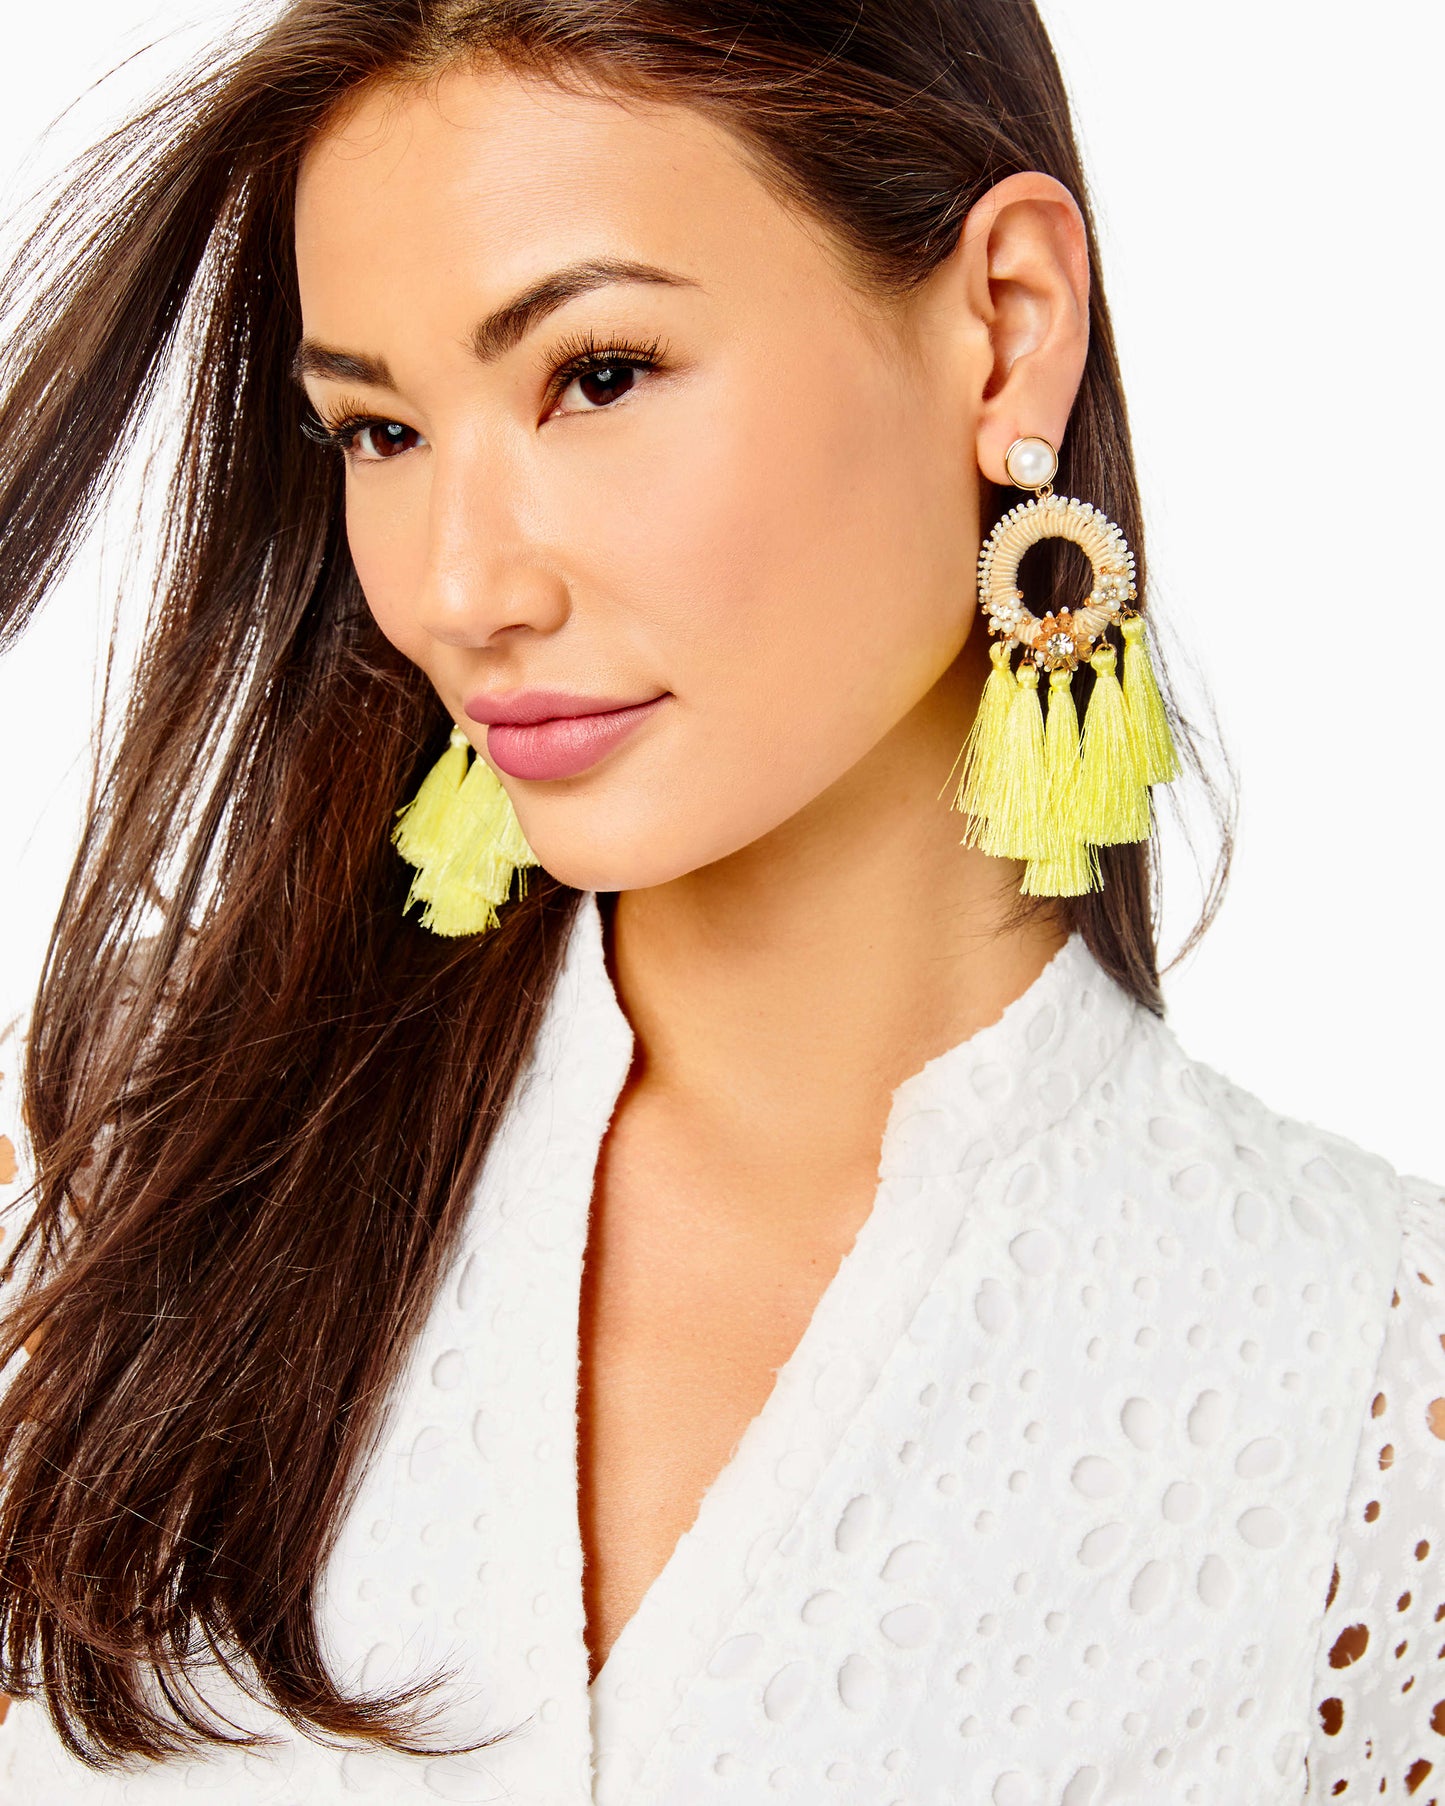 SUNS OUT EARRINGS